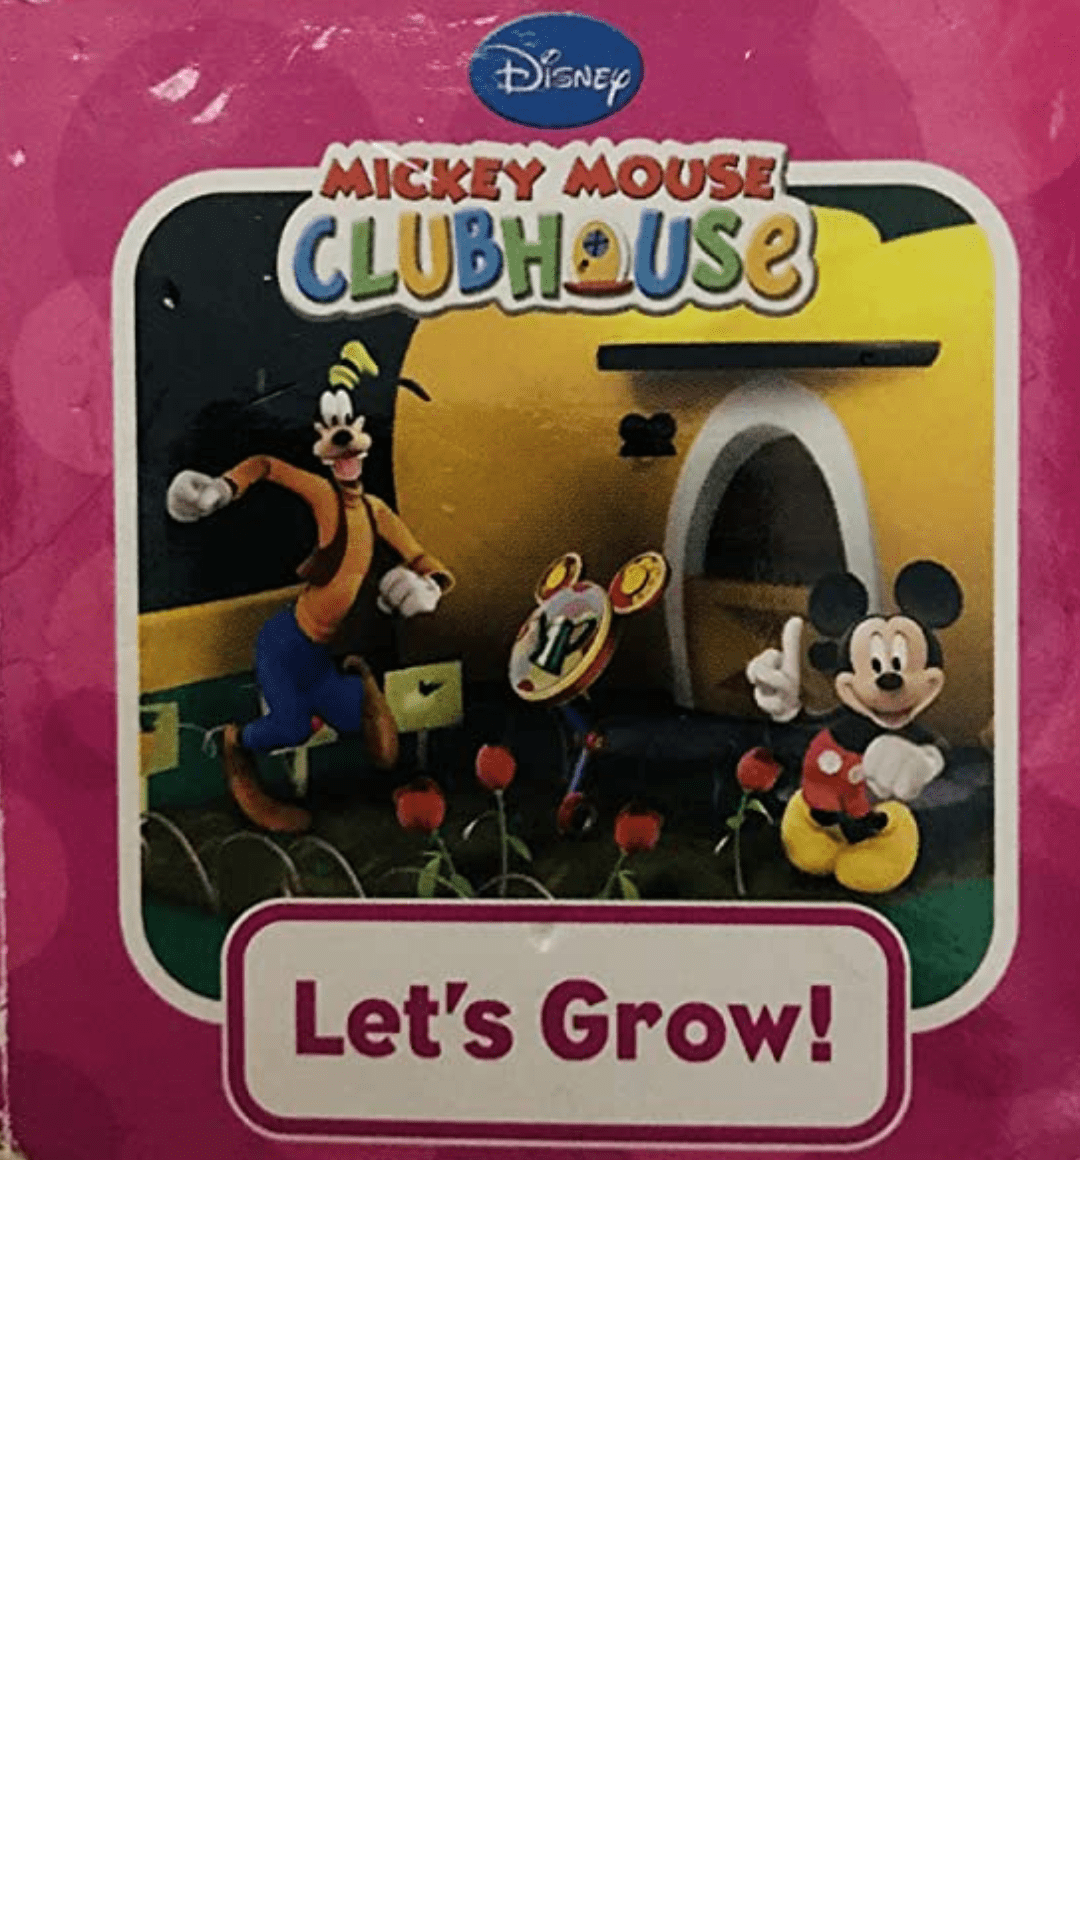 Disney Mickey Mouse Clubhouse: Let's Grow